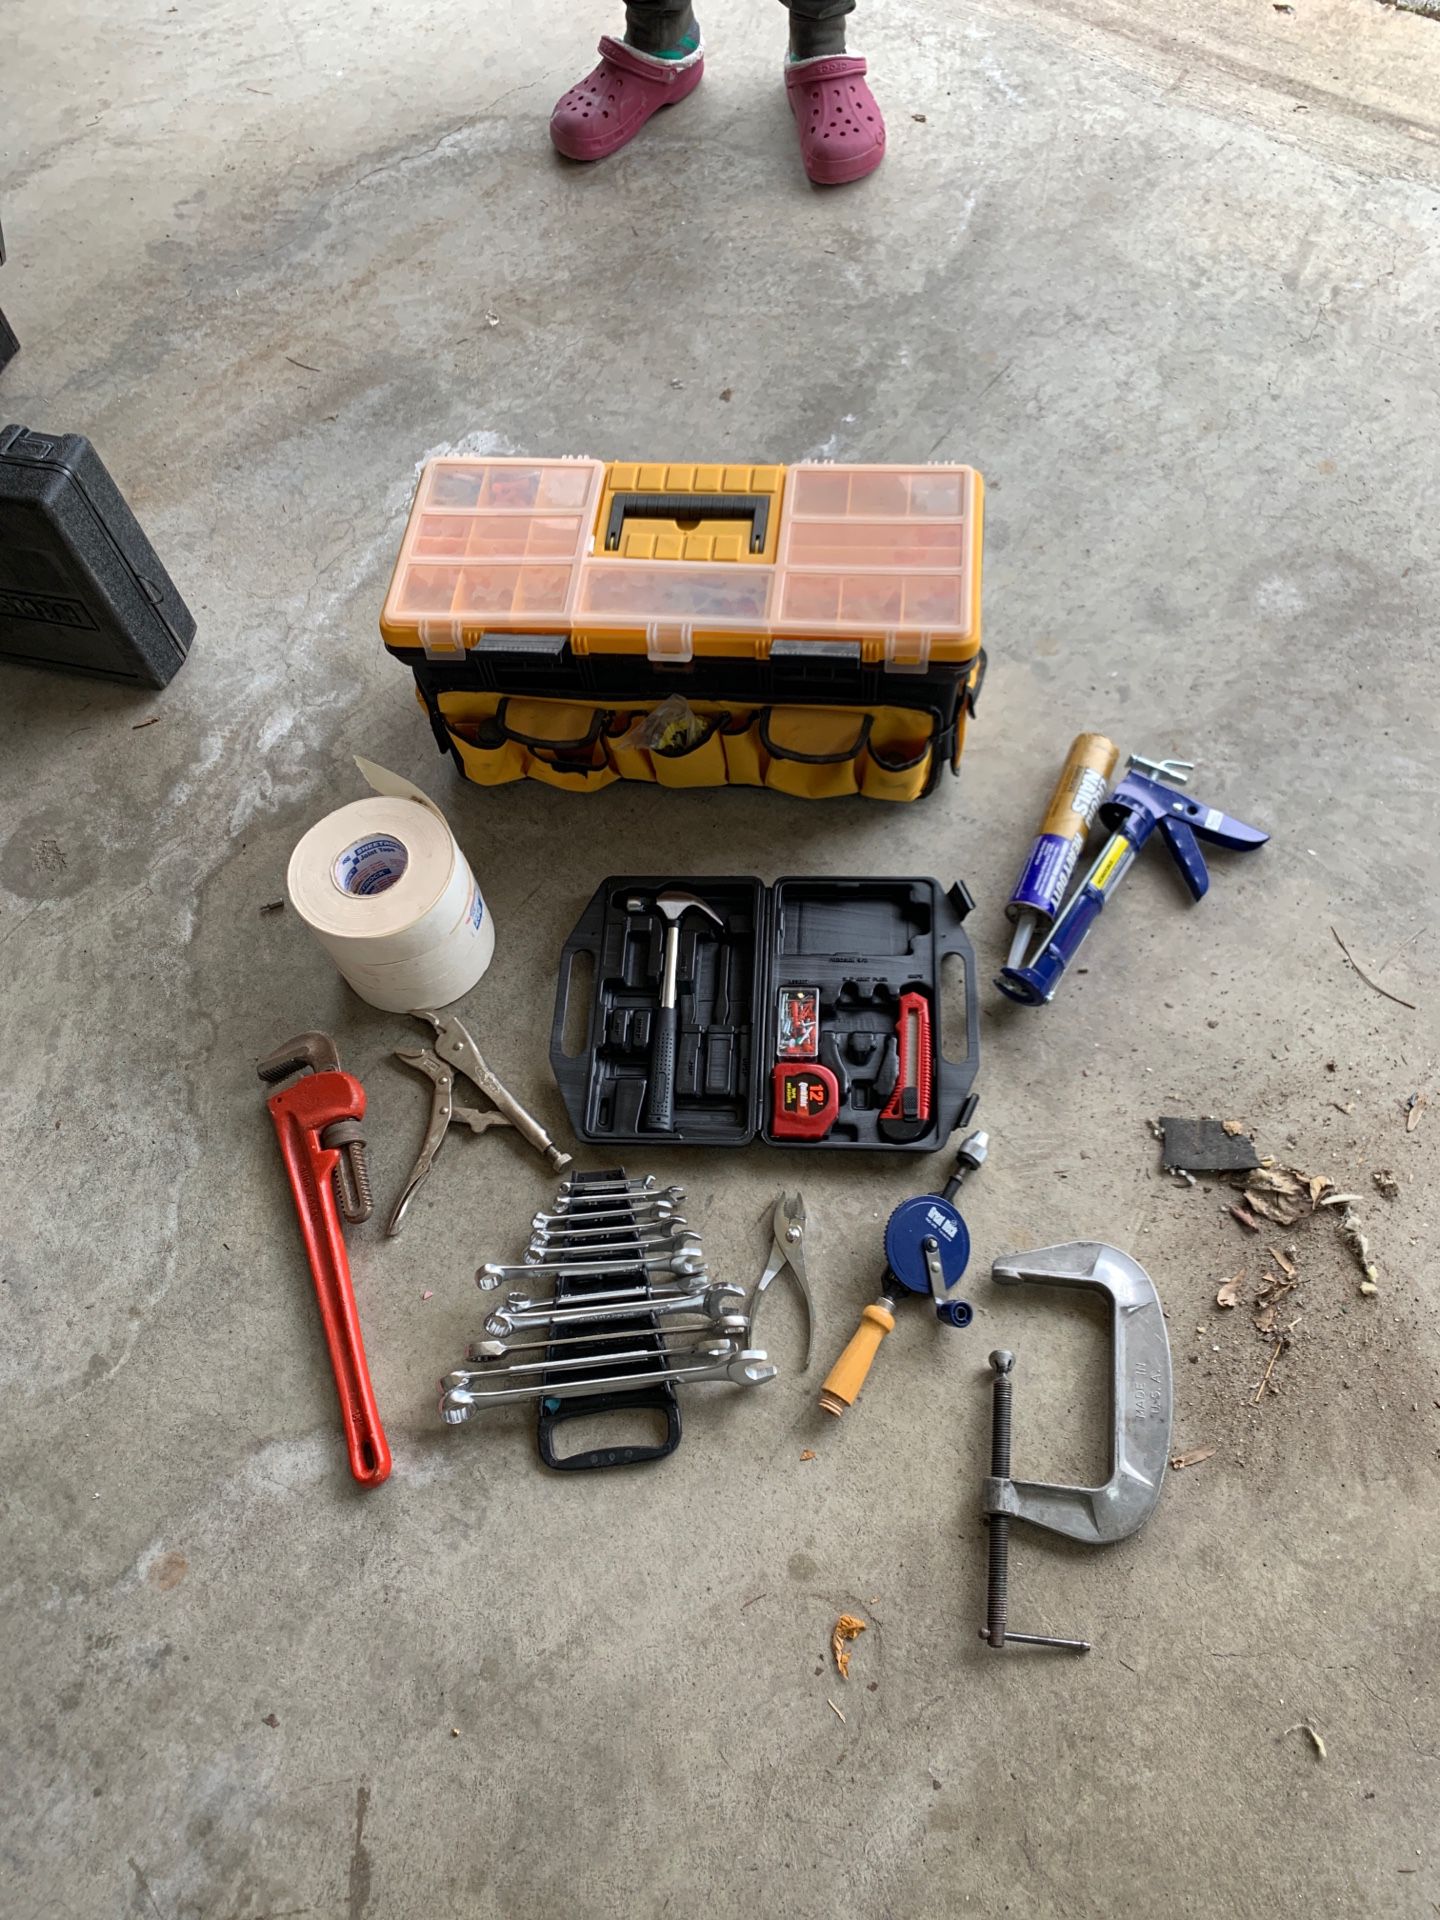 Tool Kit with various tools